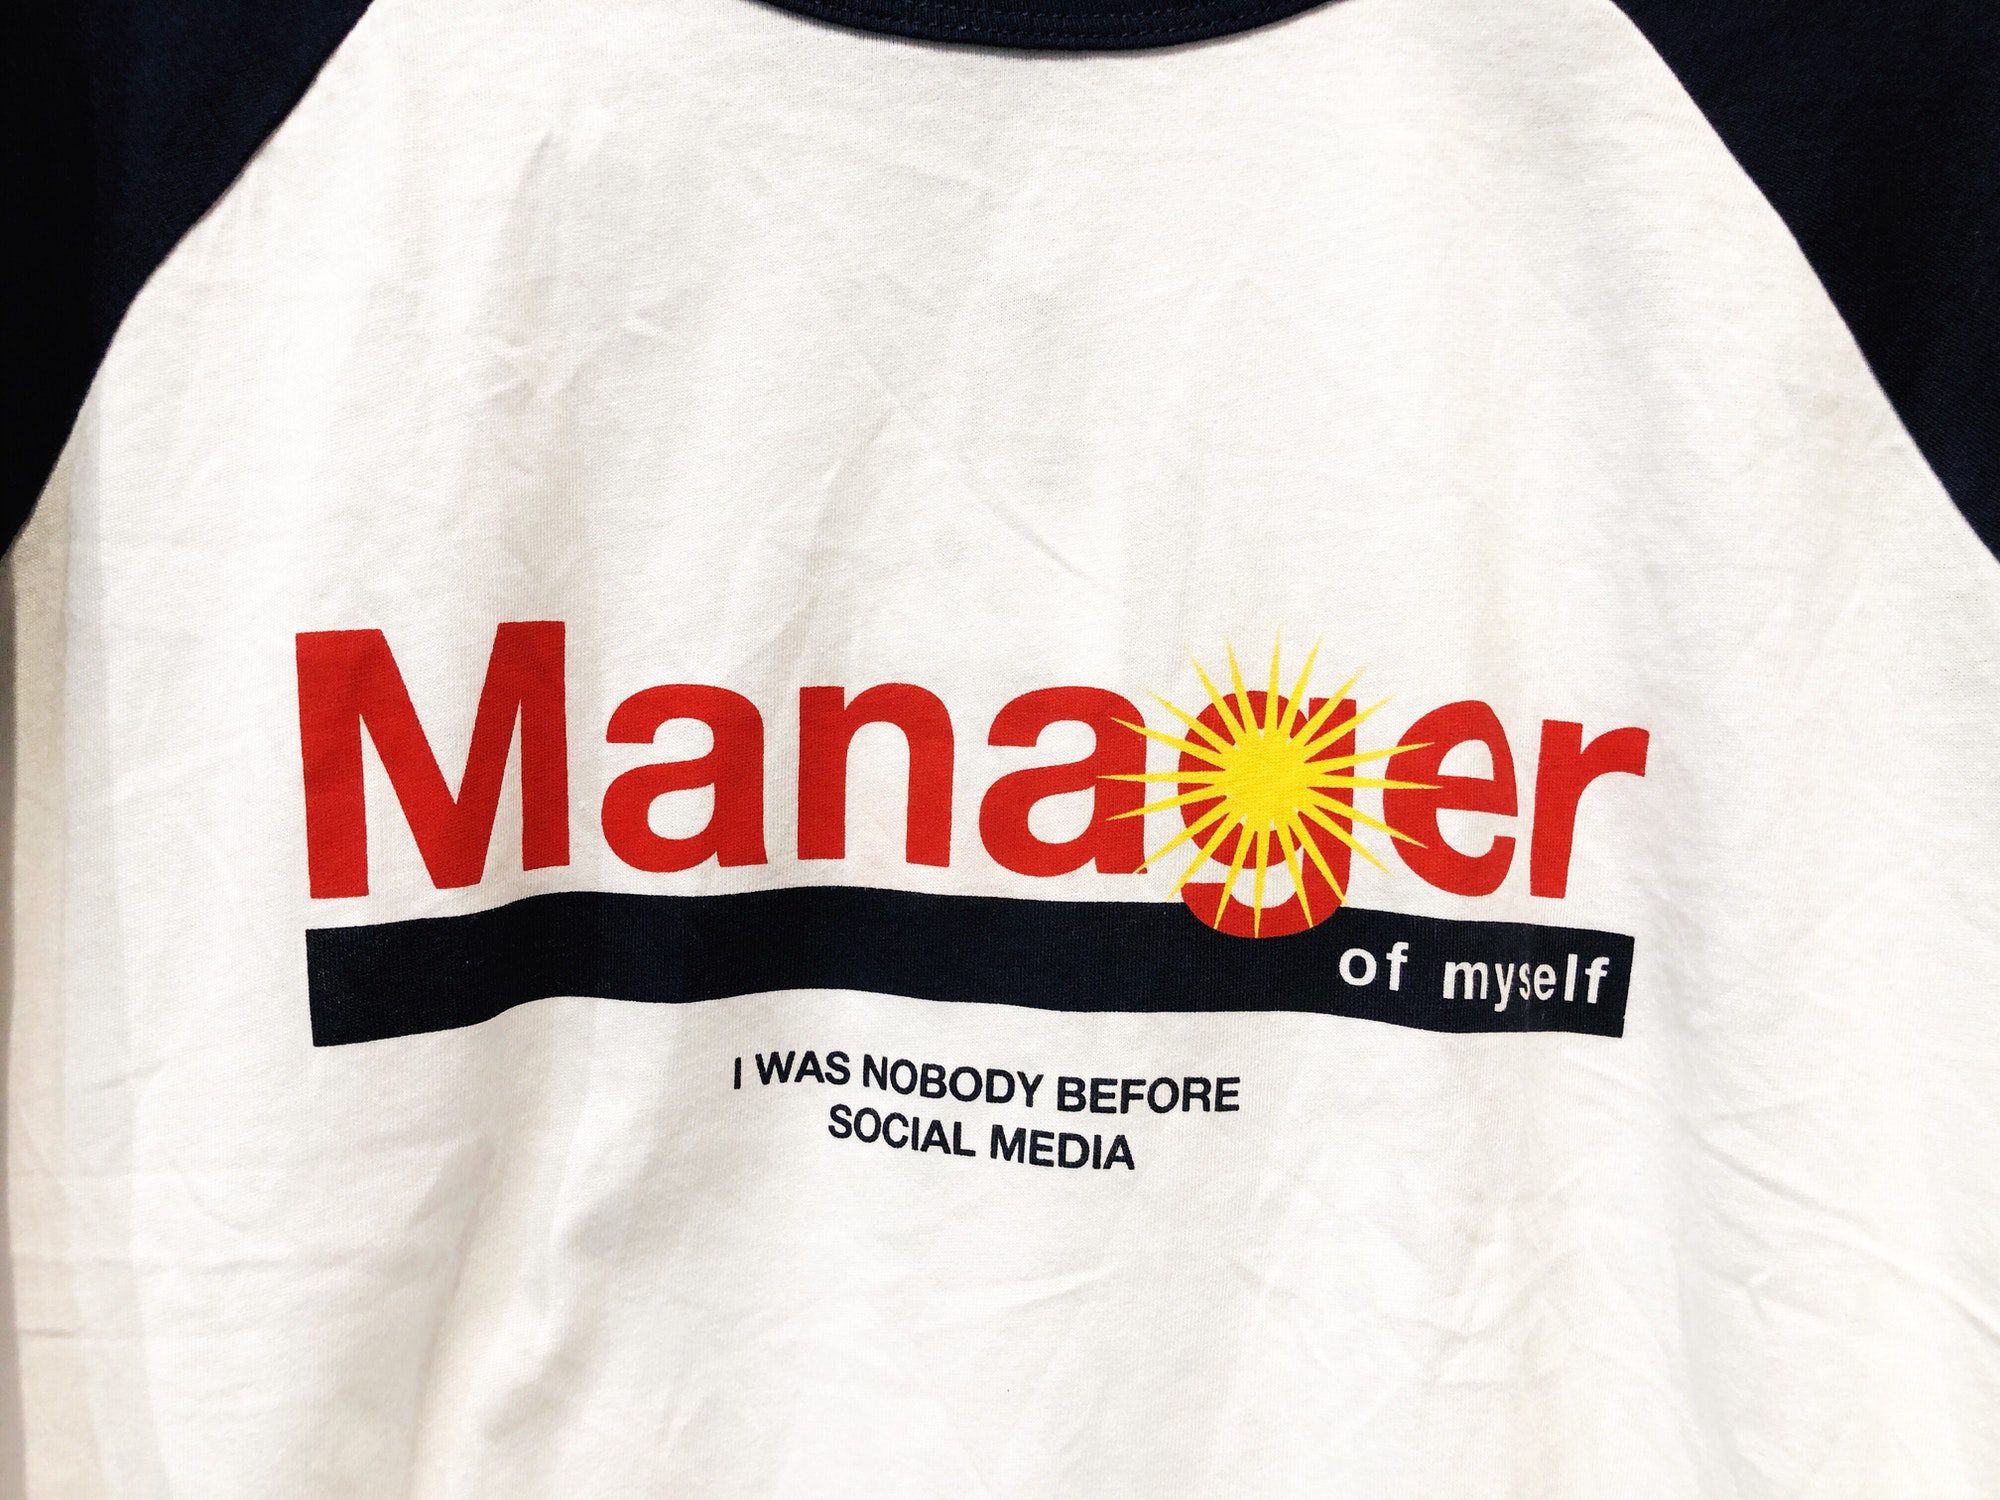 Manager of myself